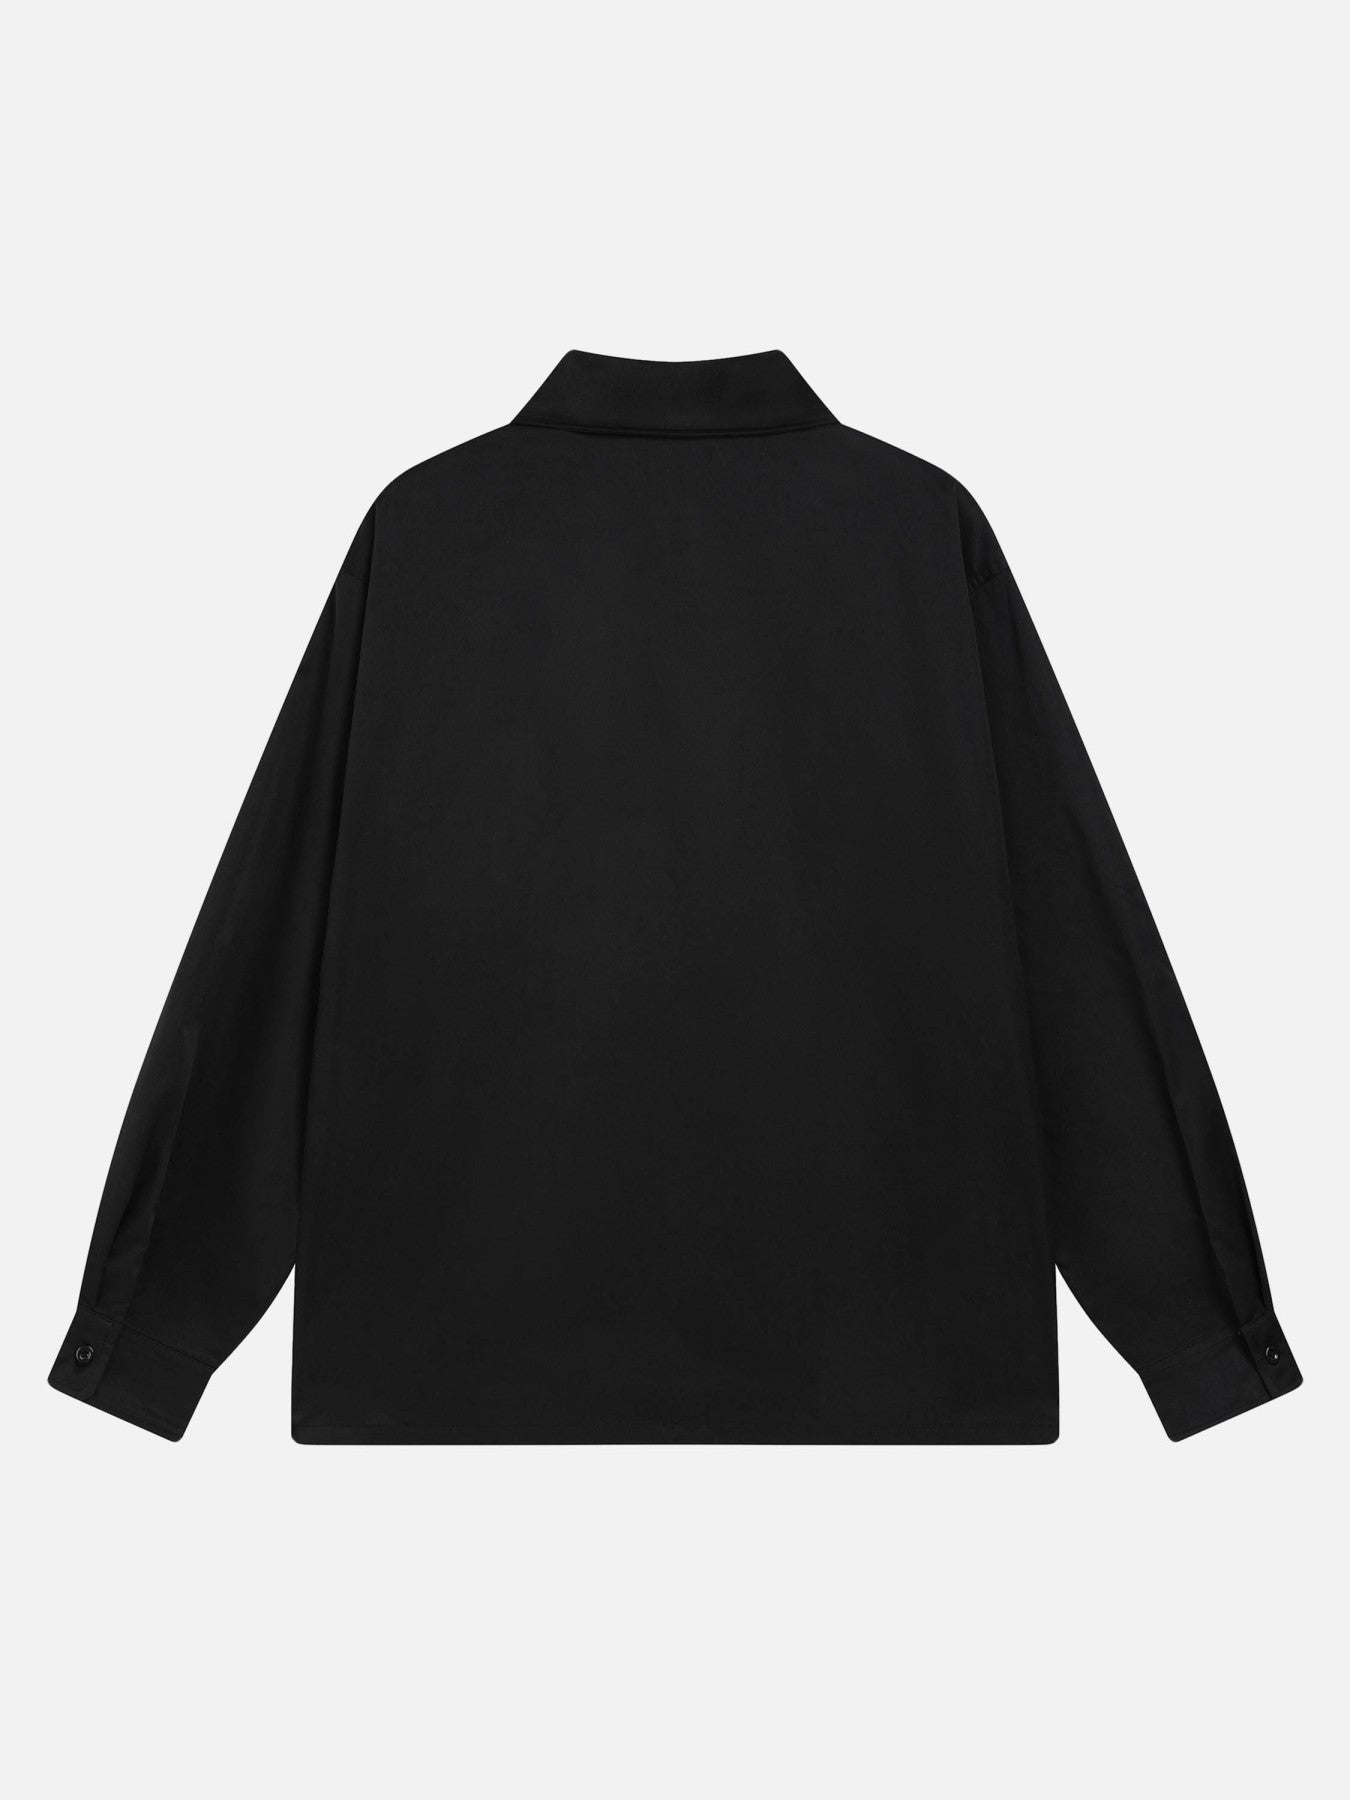 Thesupermade Silhouette Print Long Sleeve Shirt